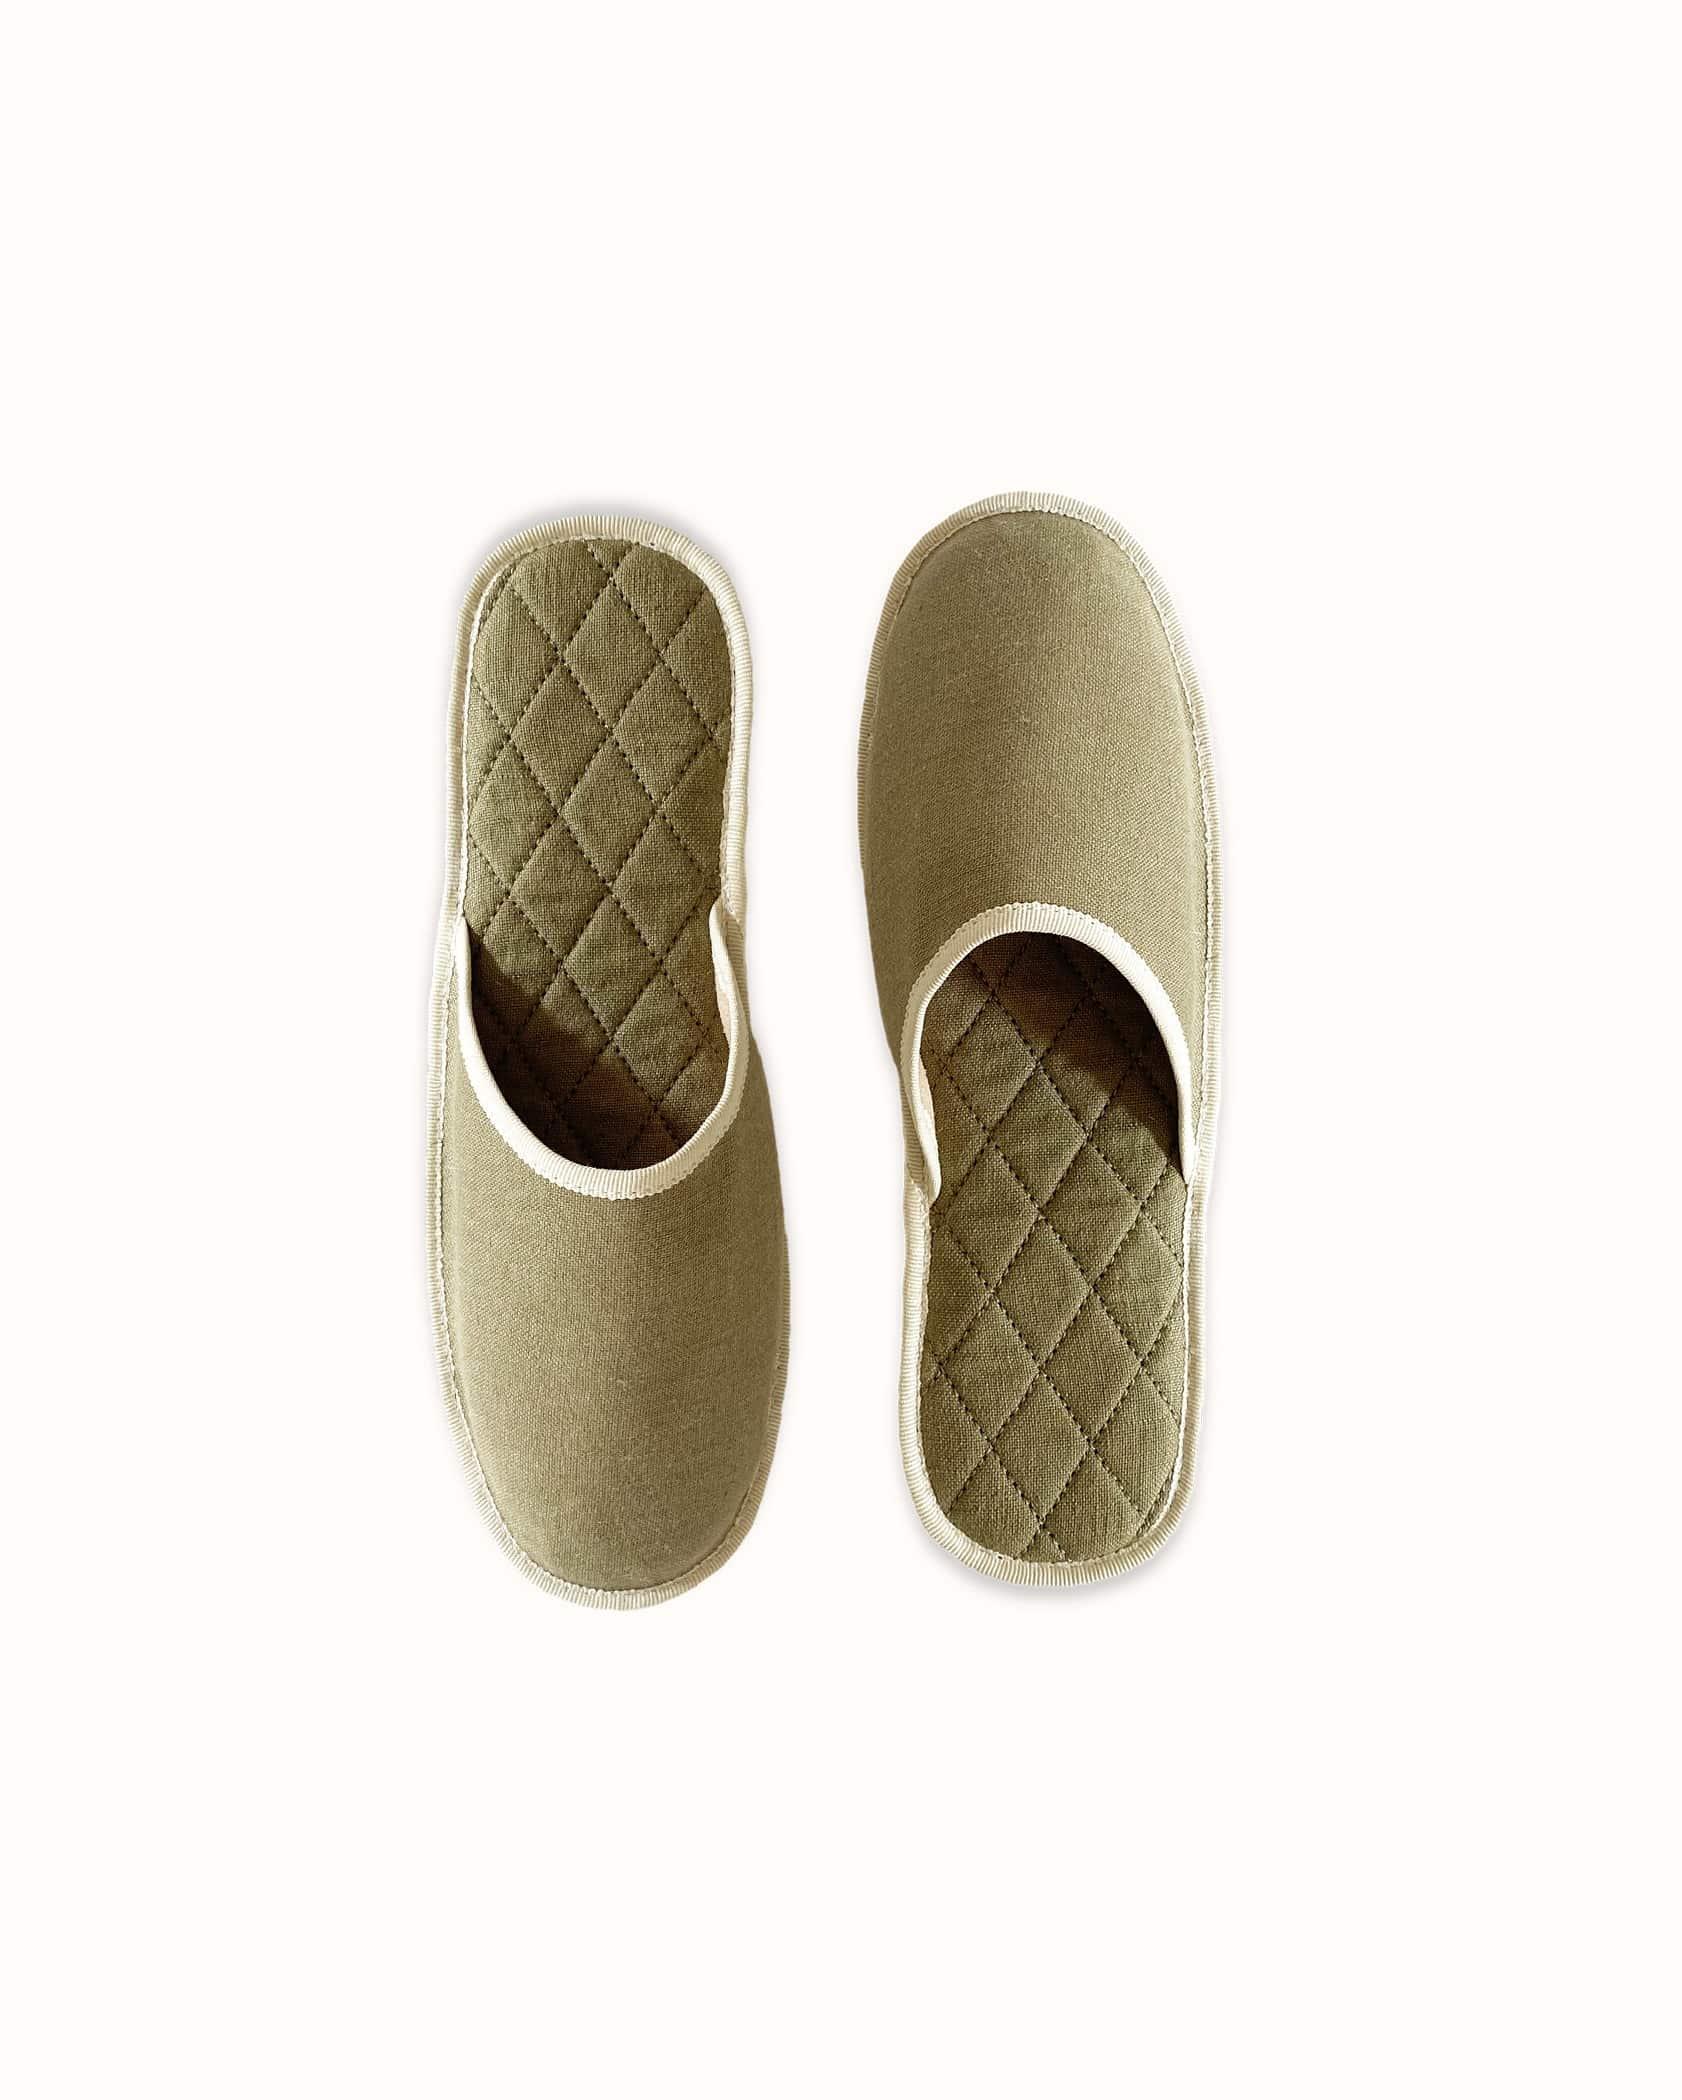 French slippers for men, women and kids. Le Spleen "Insomnie", green and white. A slip-on like hotel slippers with a quilted padding and an outstanding craftsmanship manufacturing. Made in France.